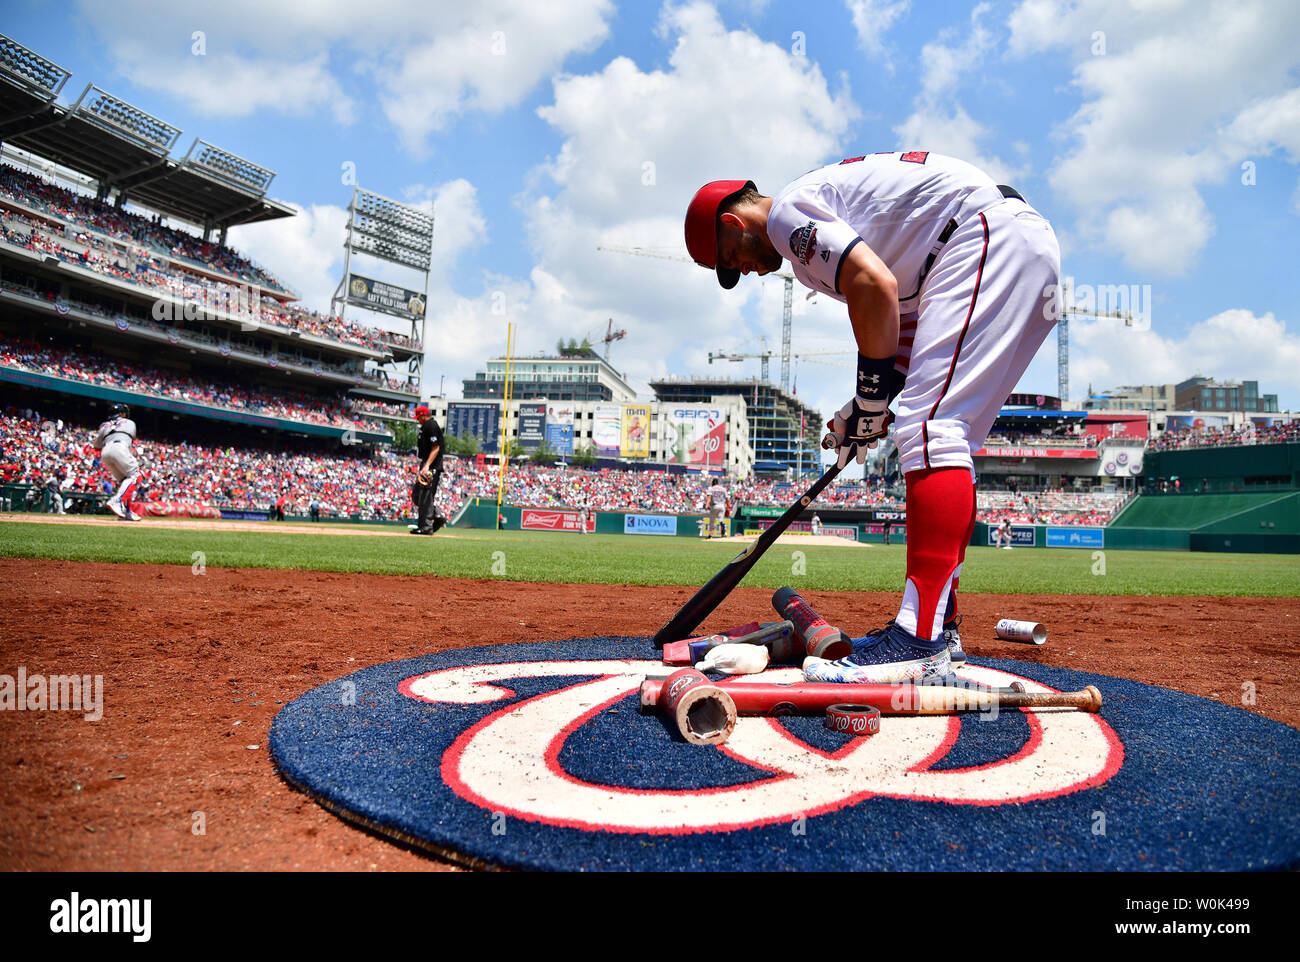 Washington Nationals right fielder Bryce Harper (34) prepare to batt against the Boston Red Sox at Nationals Park in Washington, D.C. on July 4, 2018.  Photo by Kevin Dietsch/UPI Stock Photo